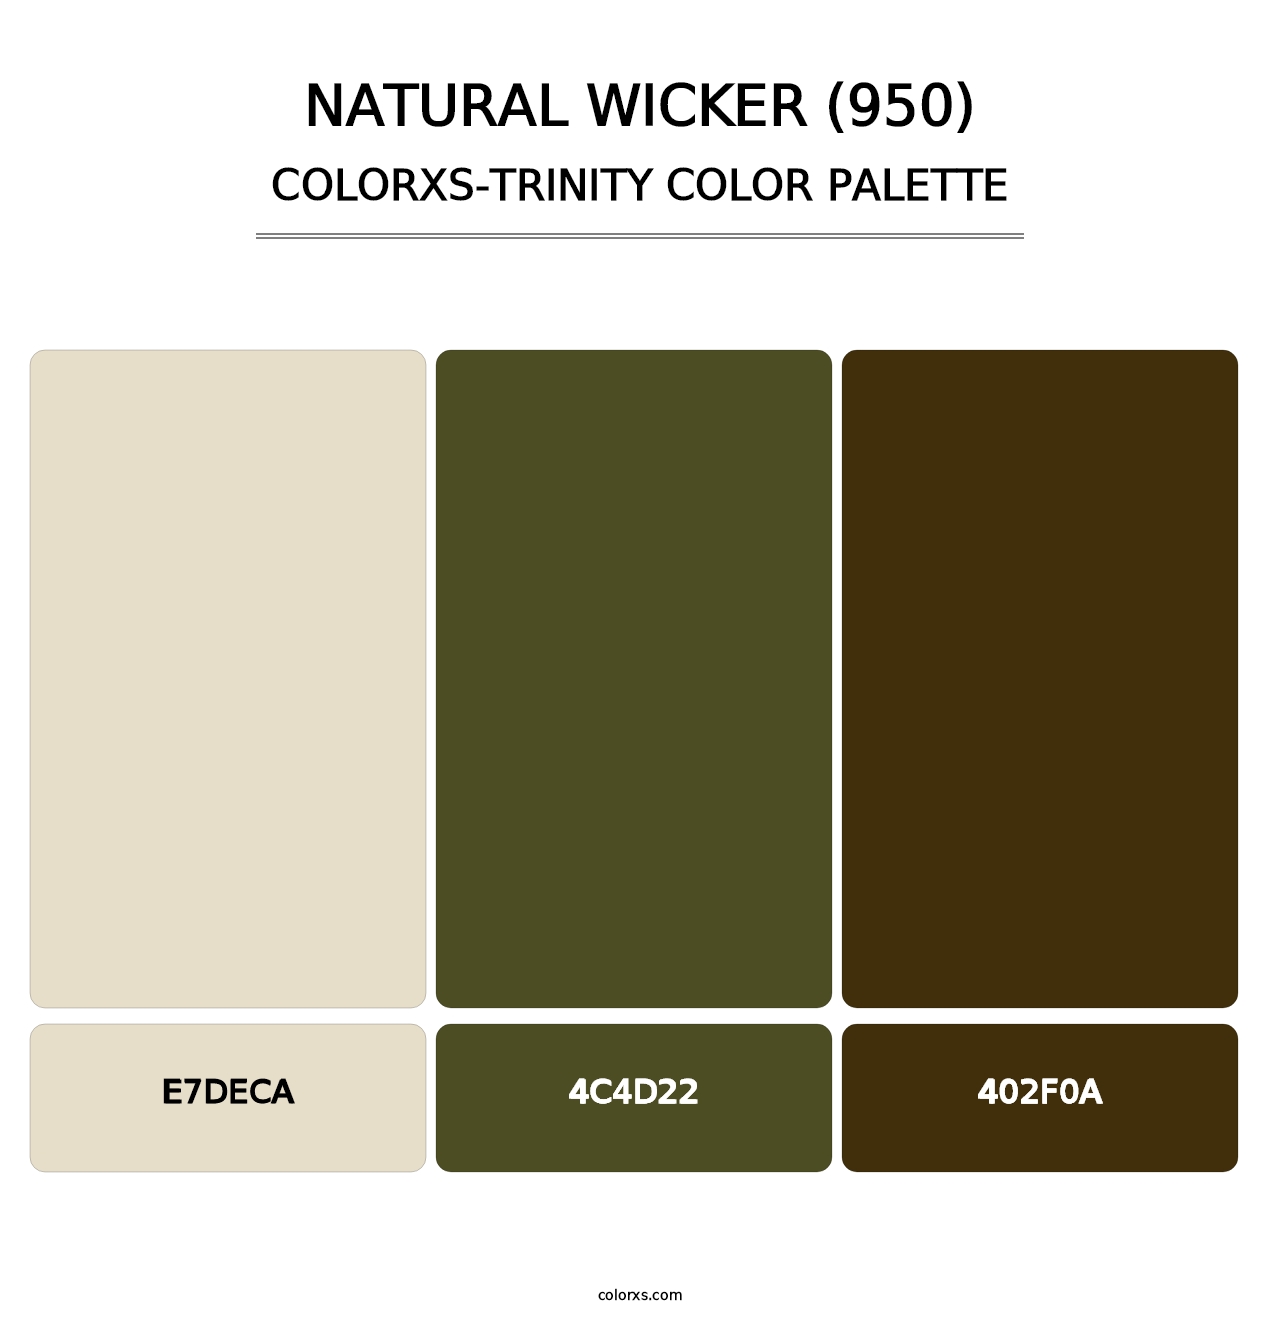 Natural Wicker (950) - Colorxs Trinity Palette